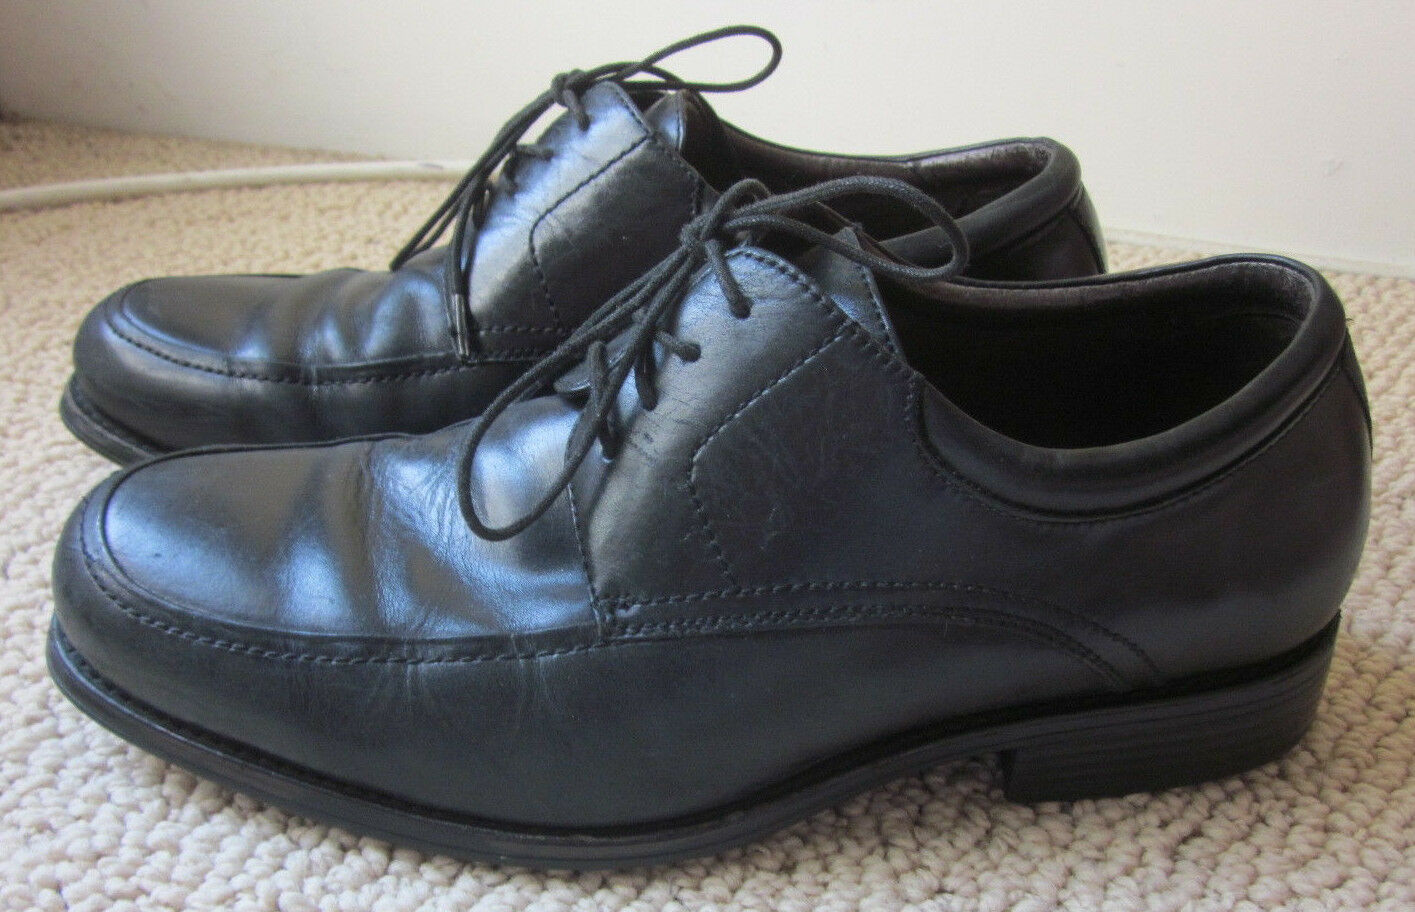 Johnson & Murphy Mens Shoes US 9 M Black Leather Lace Up Oxfords Work ...